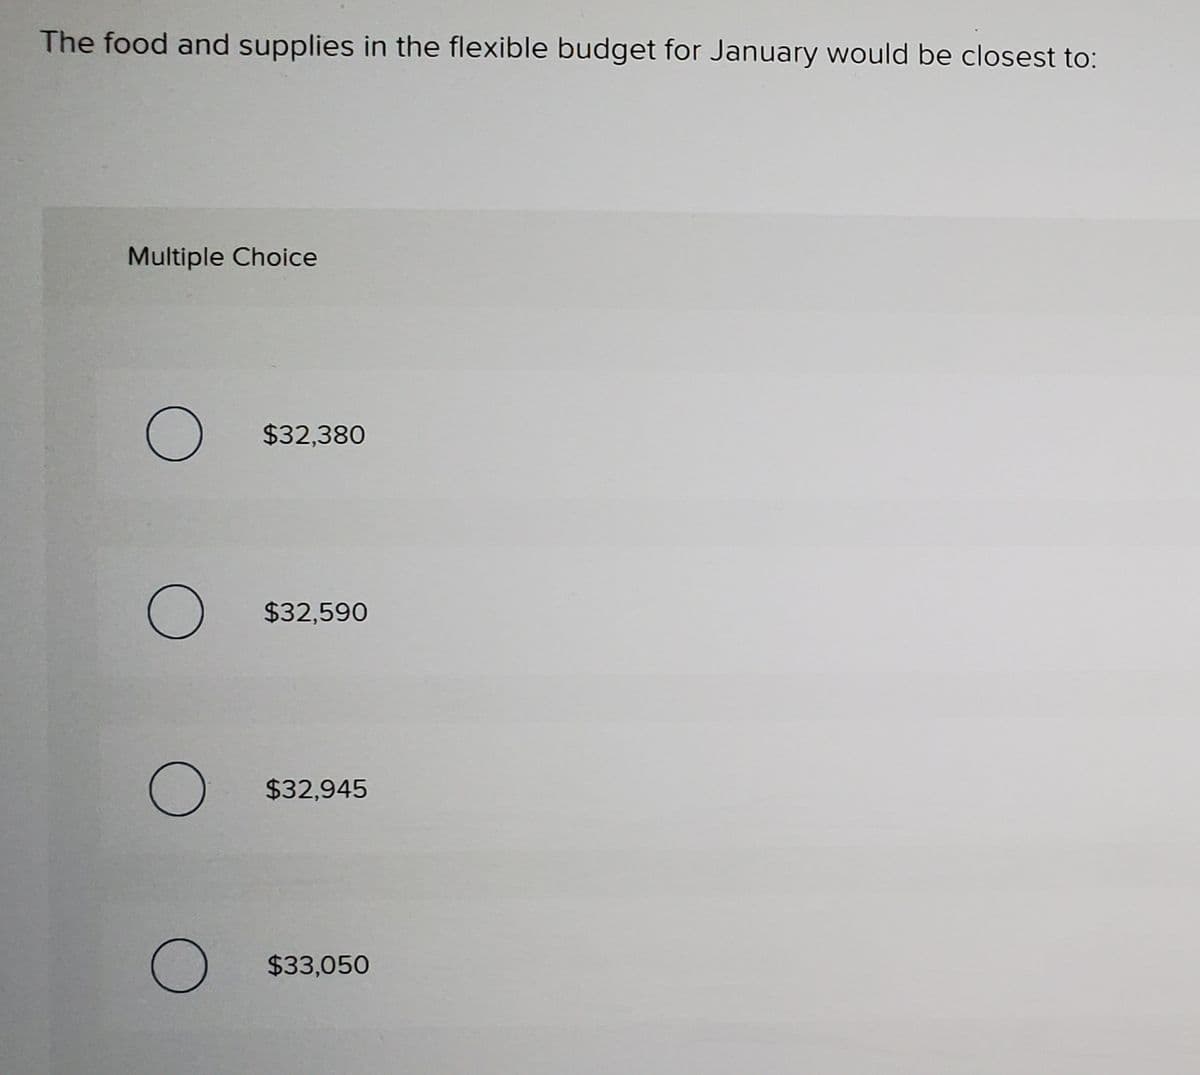 The food and supplies in the flexible budget for January would be closest to:
Multiple Choice
$32,380
$32,590
$32,945
$33,050
